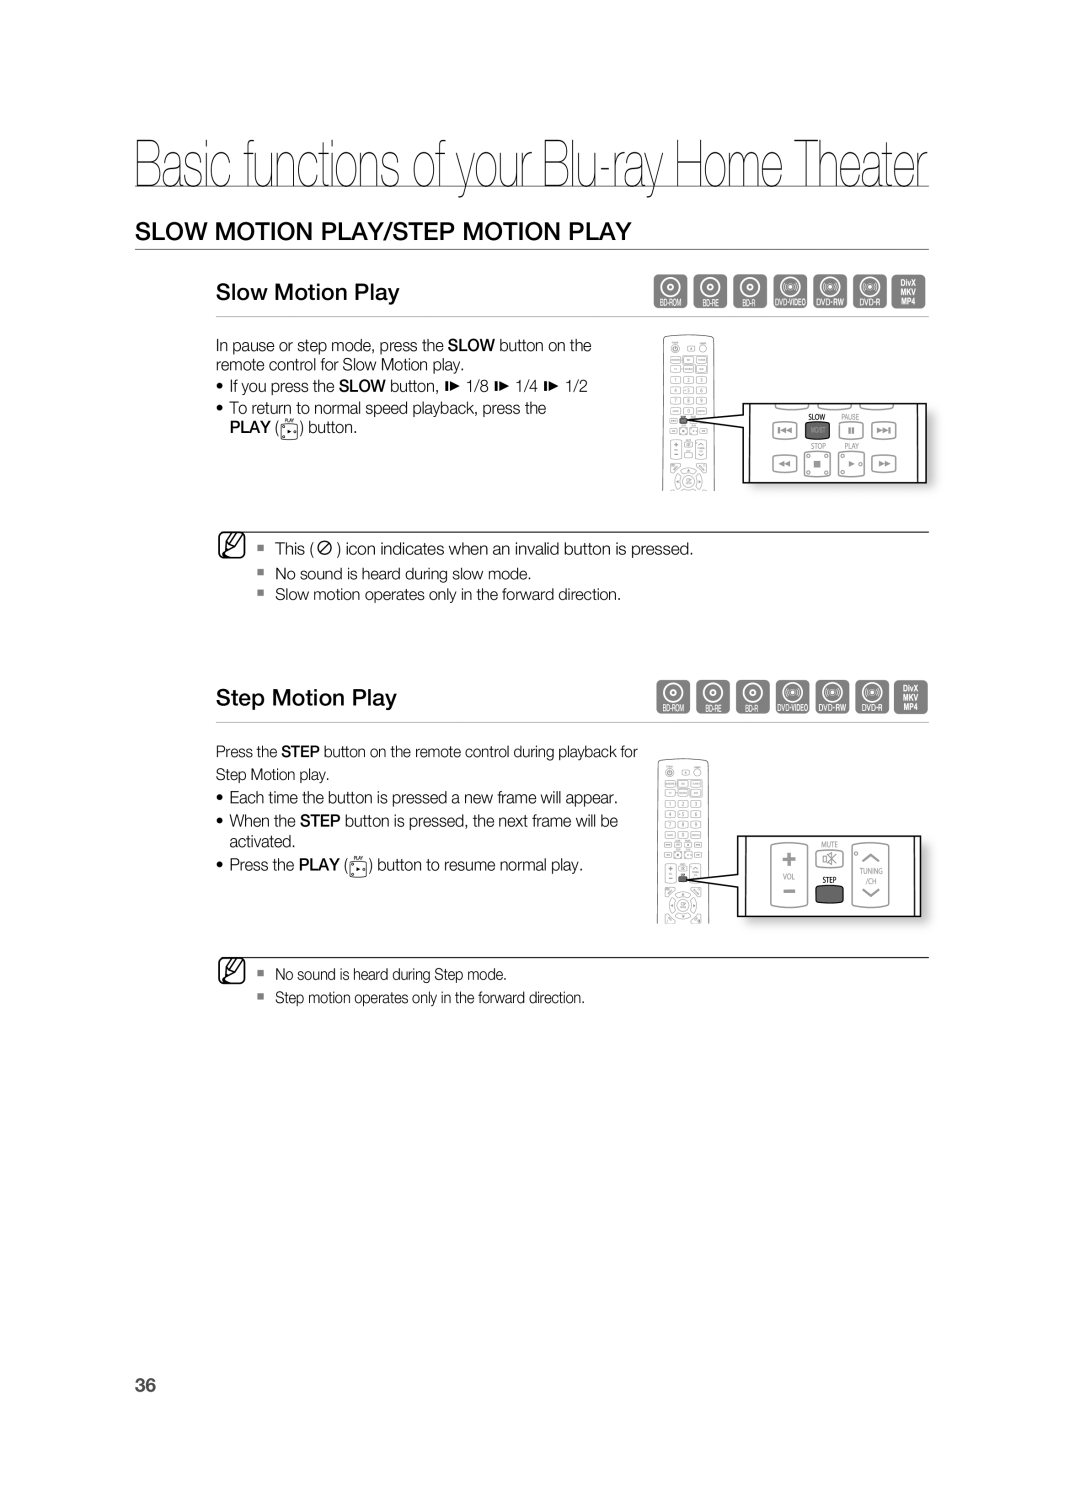 Samsung HT-BD3252 user manual Slow Motion Play/Step Motion Play, Basic functions of your Blu-rayHome Theater, hgfZCV 